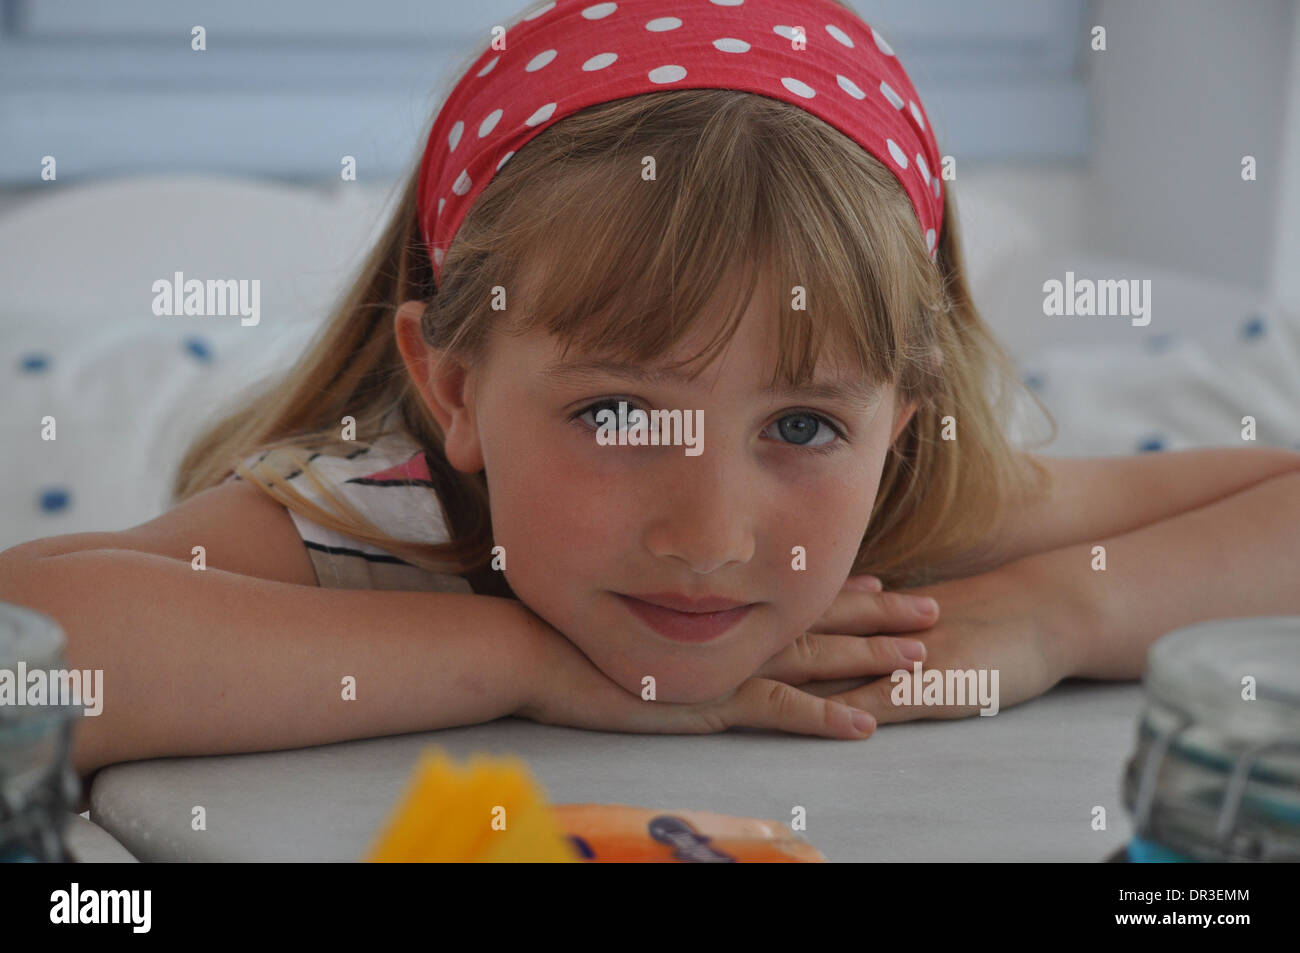 portrait of pretty little blonde girl resting her head on her hands while wearing a red polka dot hair band Stock Photo